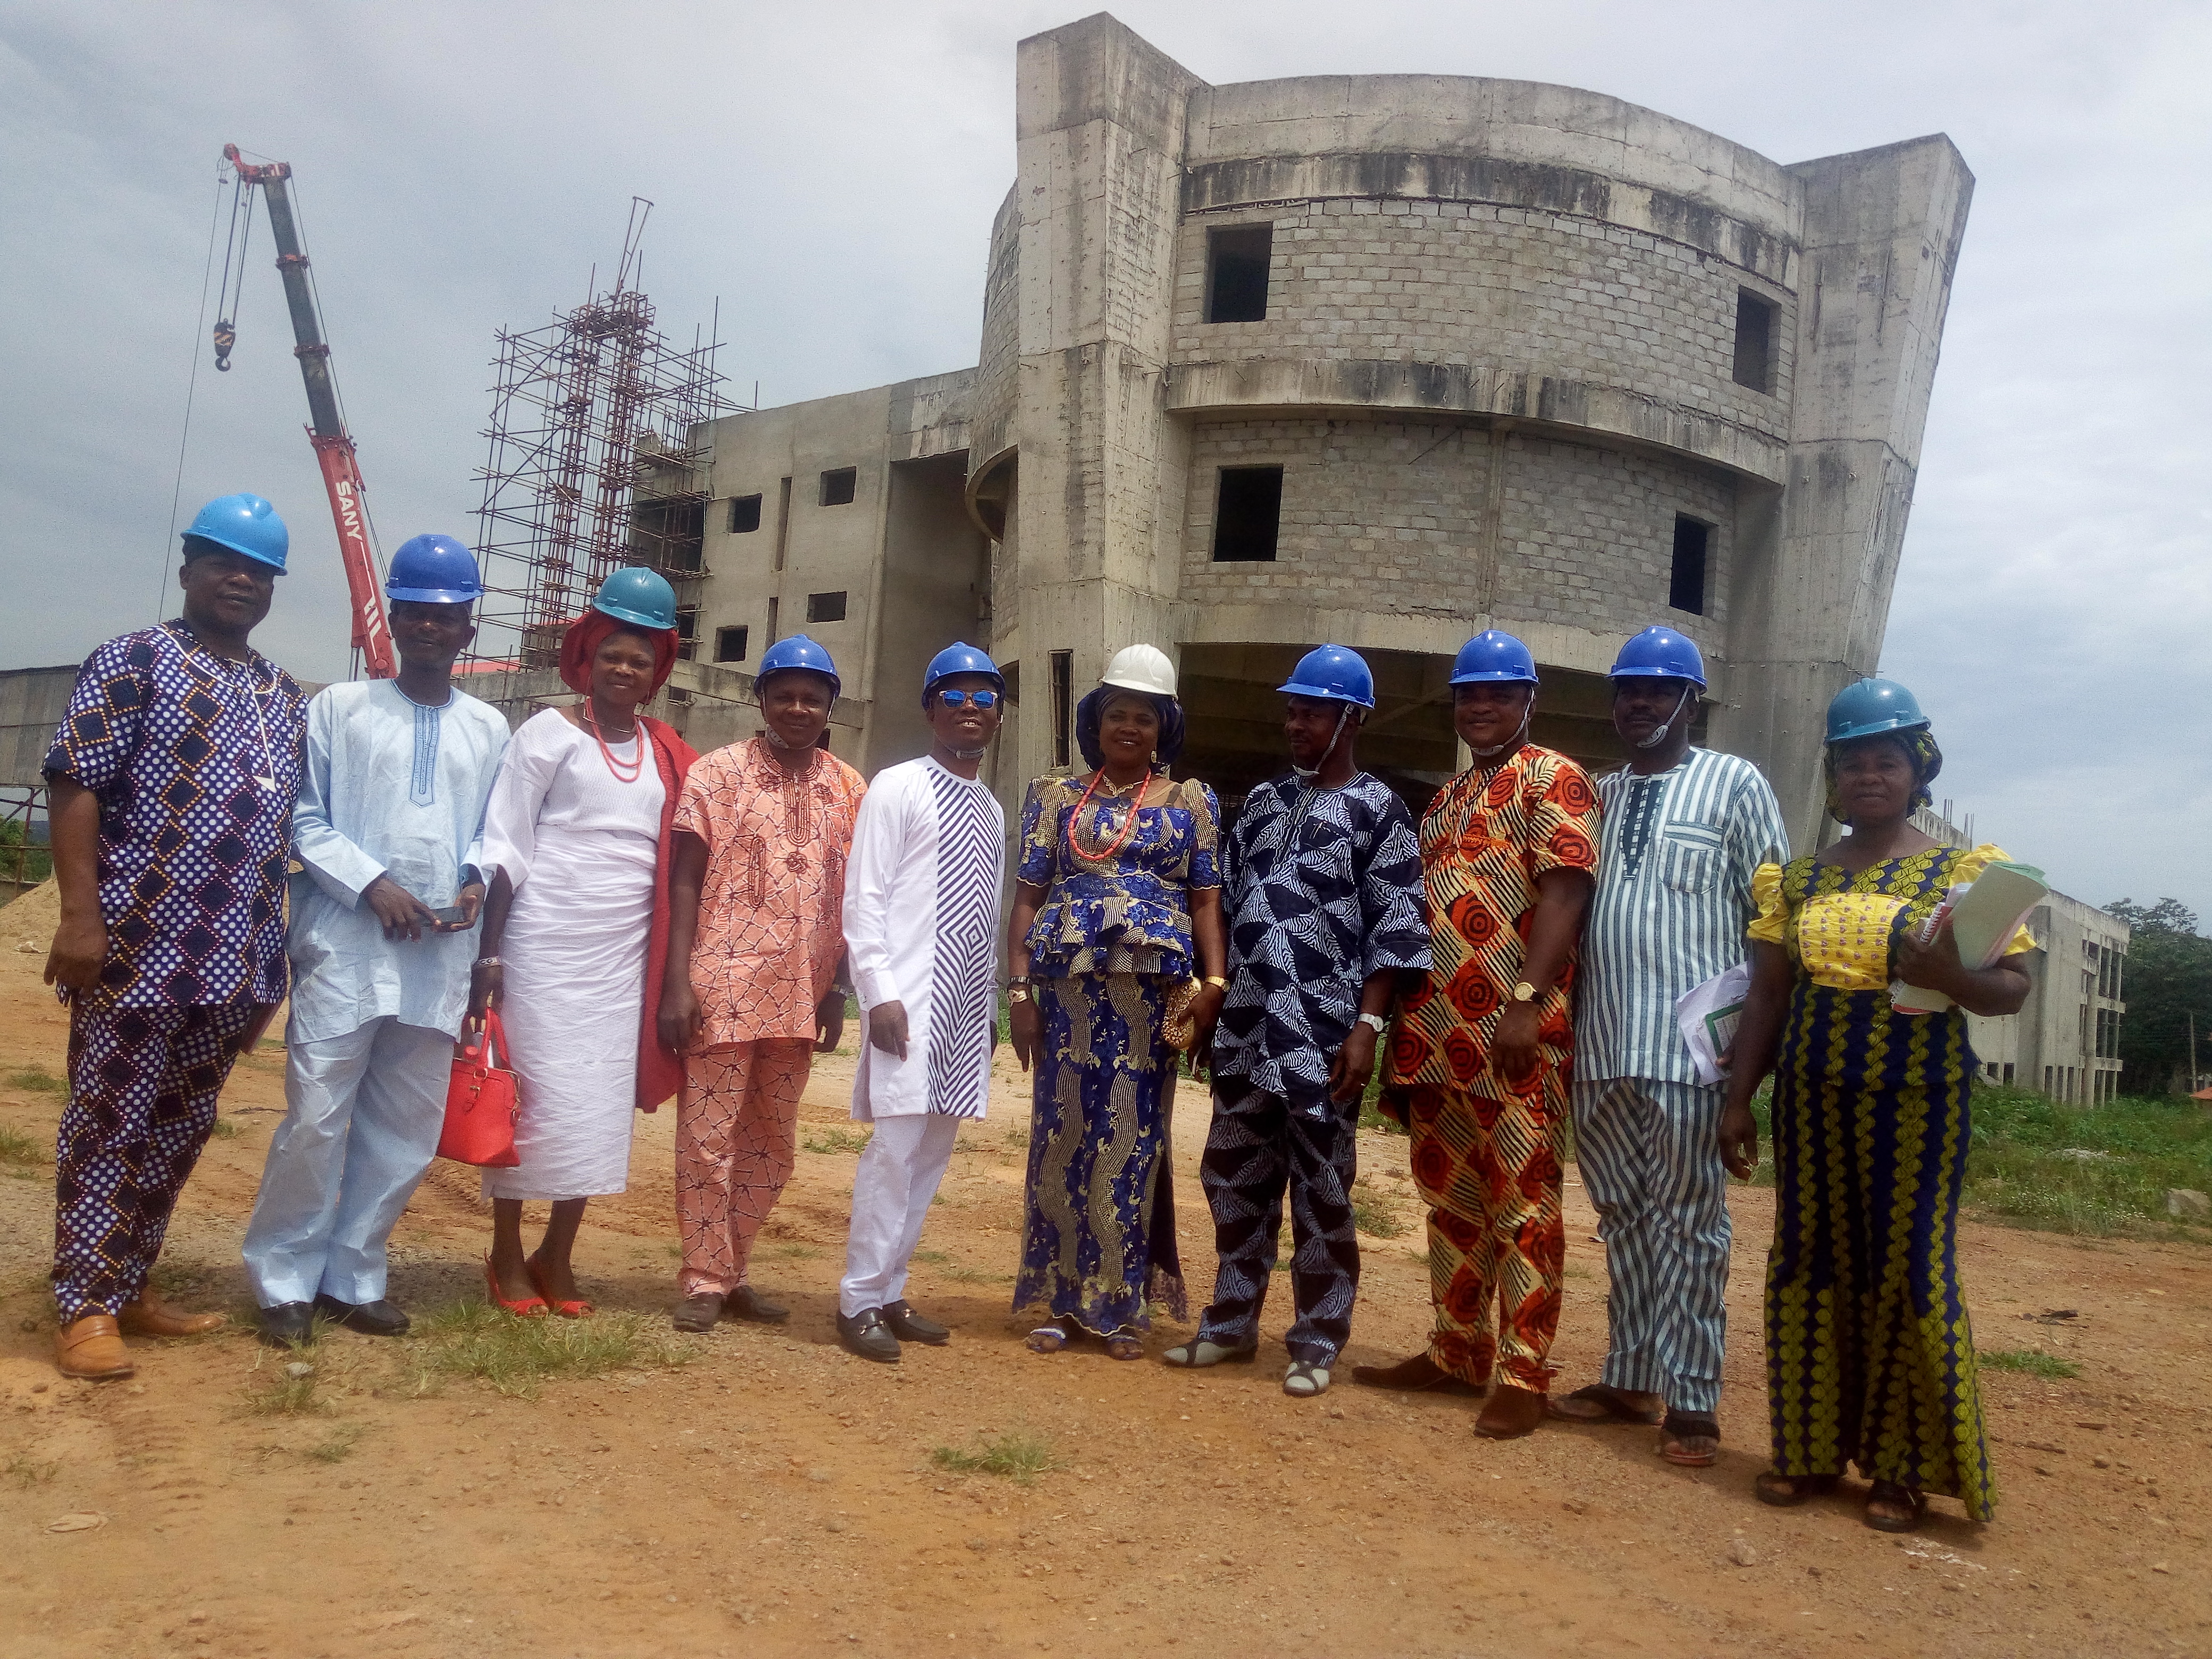 Director General Ekiti state council for Arts and Culture Ambassador Wale Ojo Lanre led other top management staff of the council on the tour of Civic centre to inspect the space dedicated for Art Gallery, Museum , Amphitheatre and cinema inside the ongoing Civic Centre